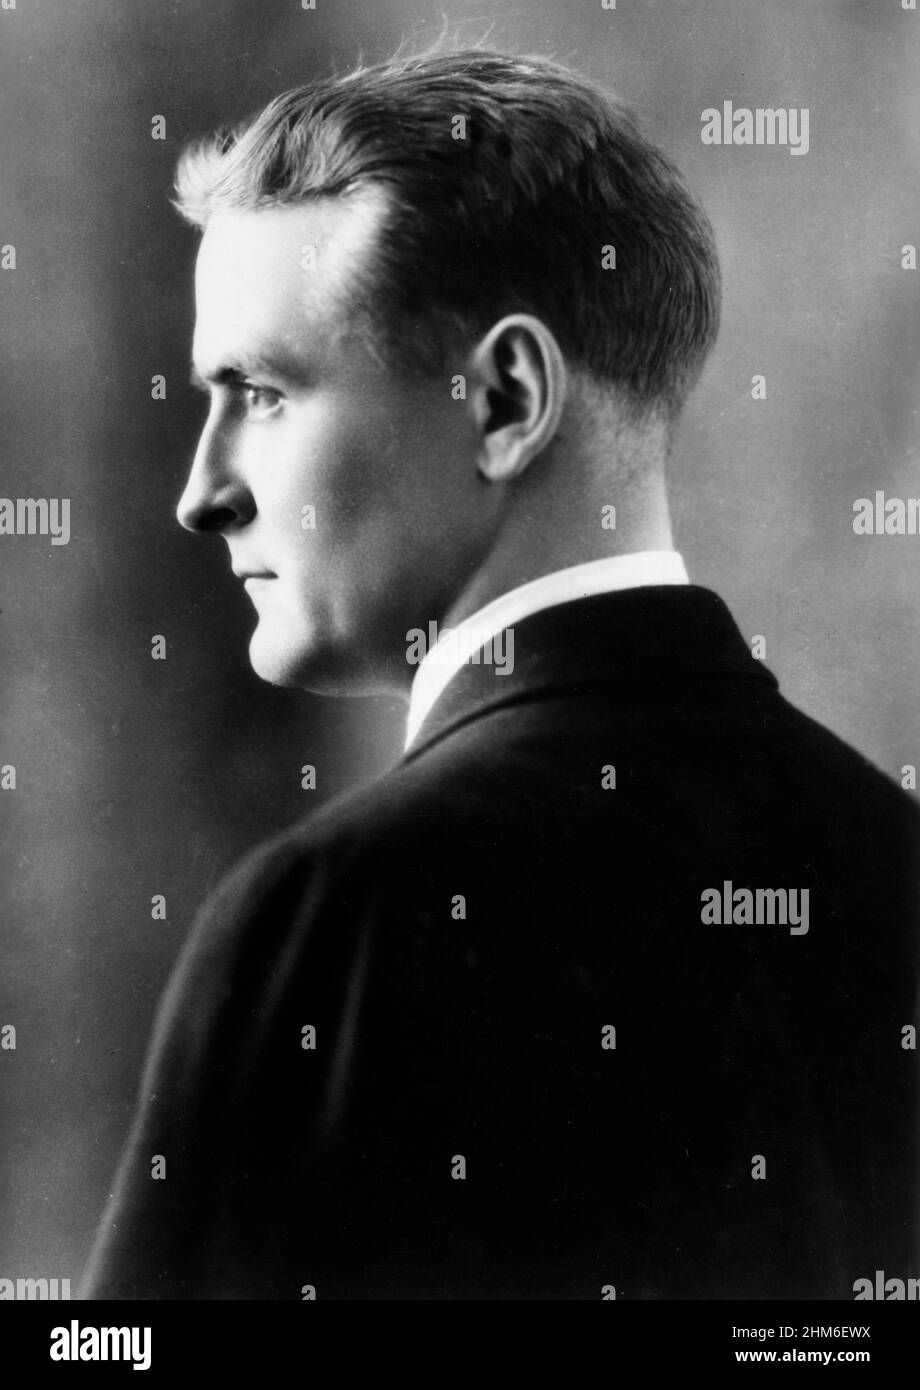 The american writer F Scott Fitzgerald, author of The Great Gatsby, in 1927 aged 31. Stock Photo